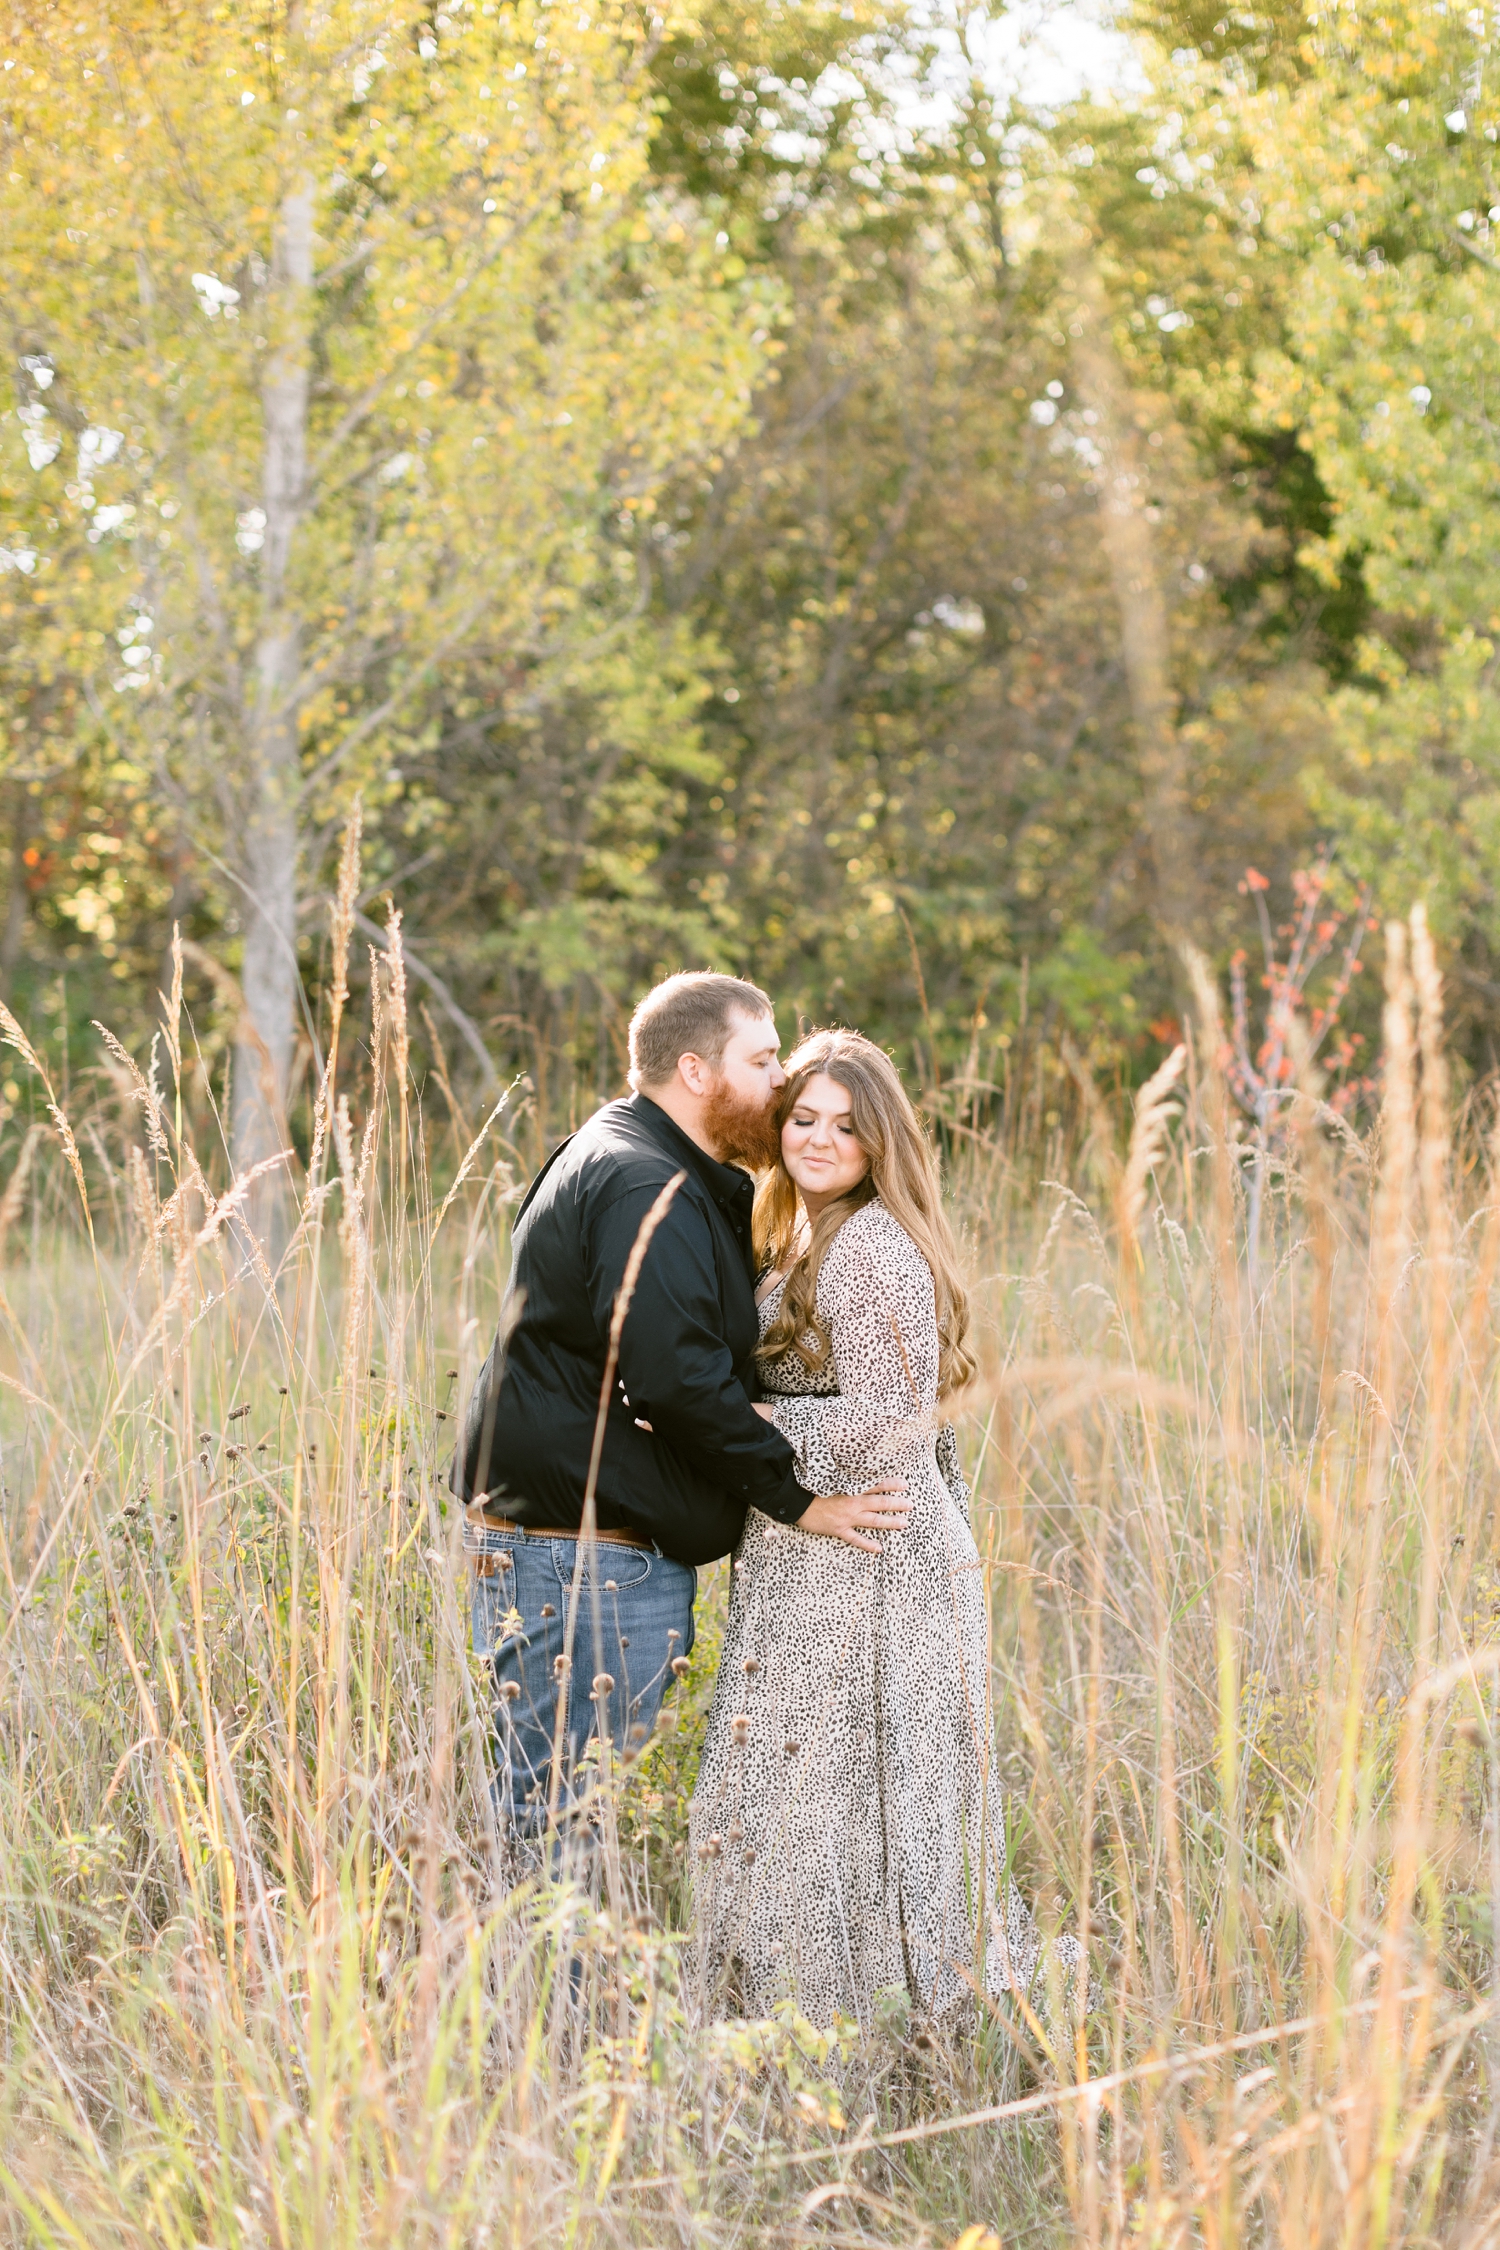 Trent kisses his bride-to-be on the cheek surrounded by fall foliage in a grassy field at Sheldon Park in Humboldt, IA | CB Studio